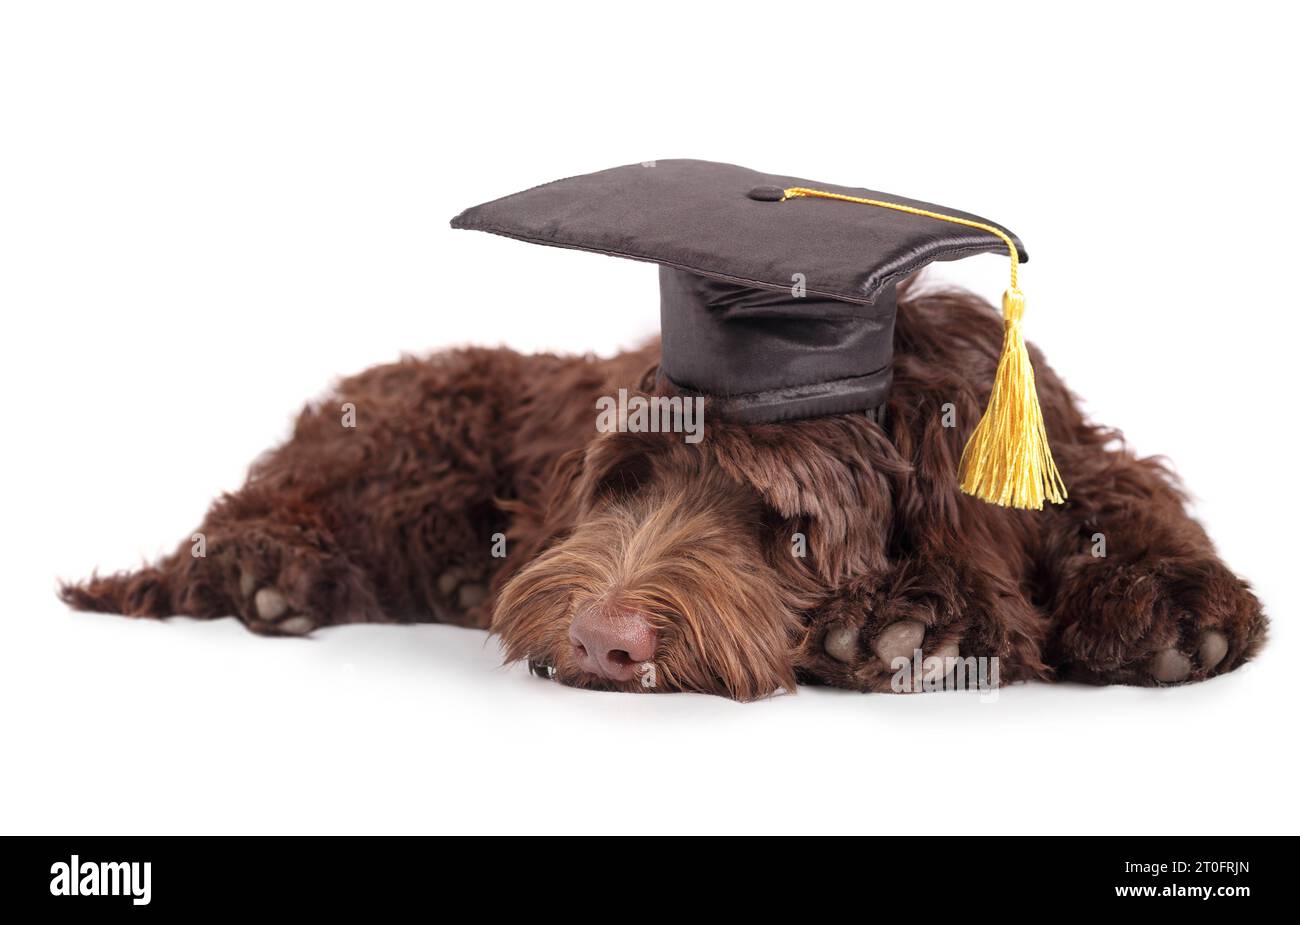 Fluffy puppy sleeping with graduation hat with tassel. Pet concept for celebrating graduation, training class, academic certifications or diplomas. Fu Stock Photo